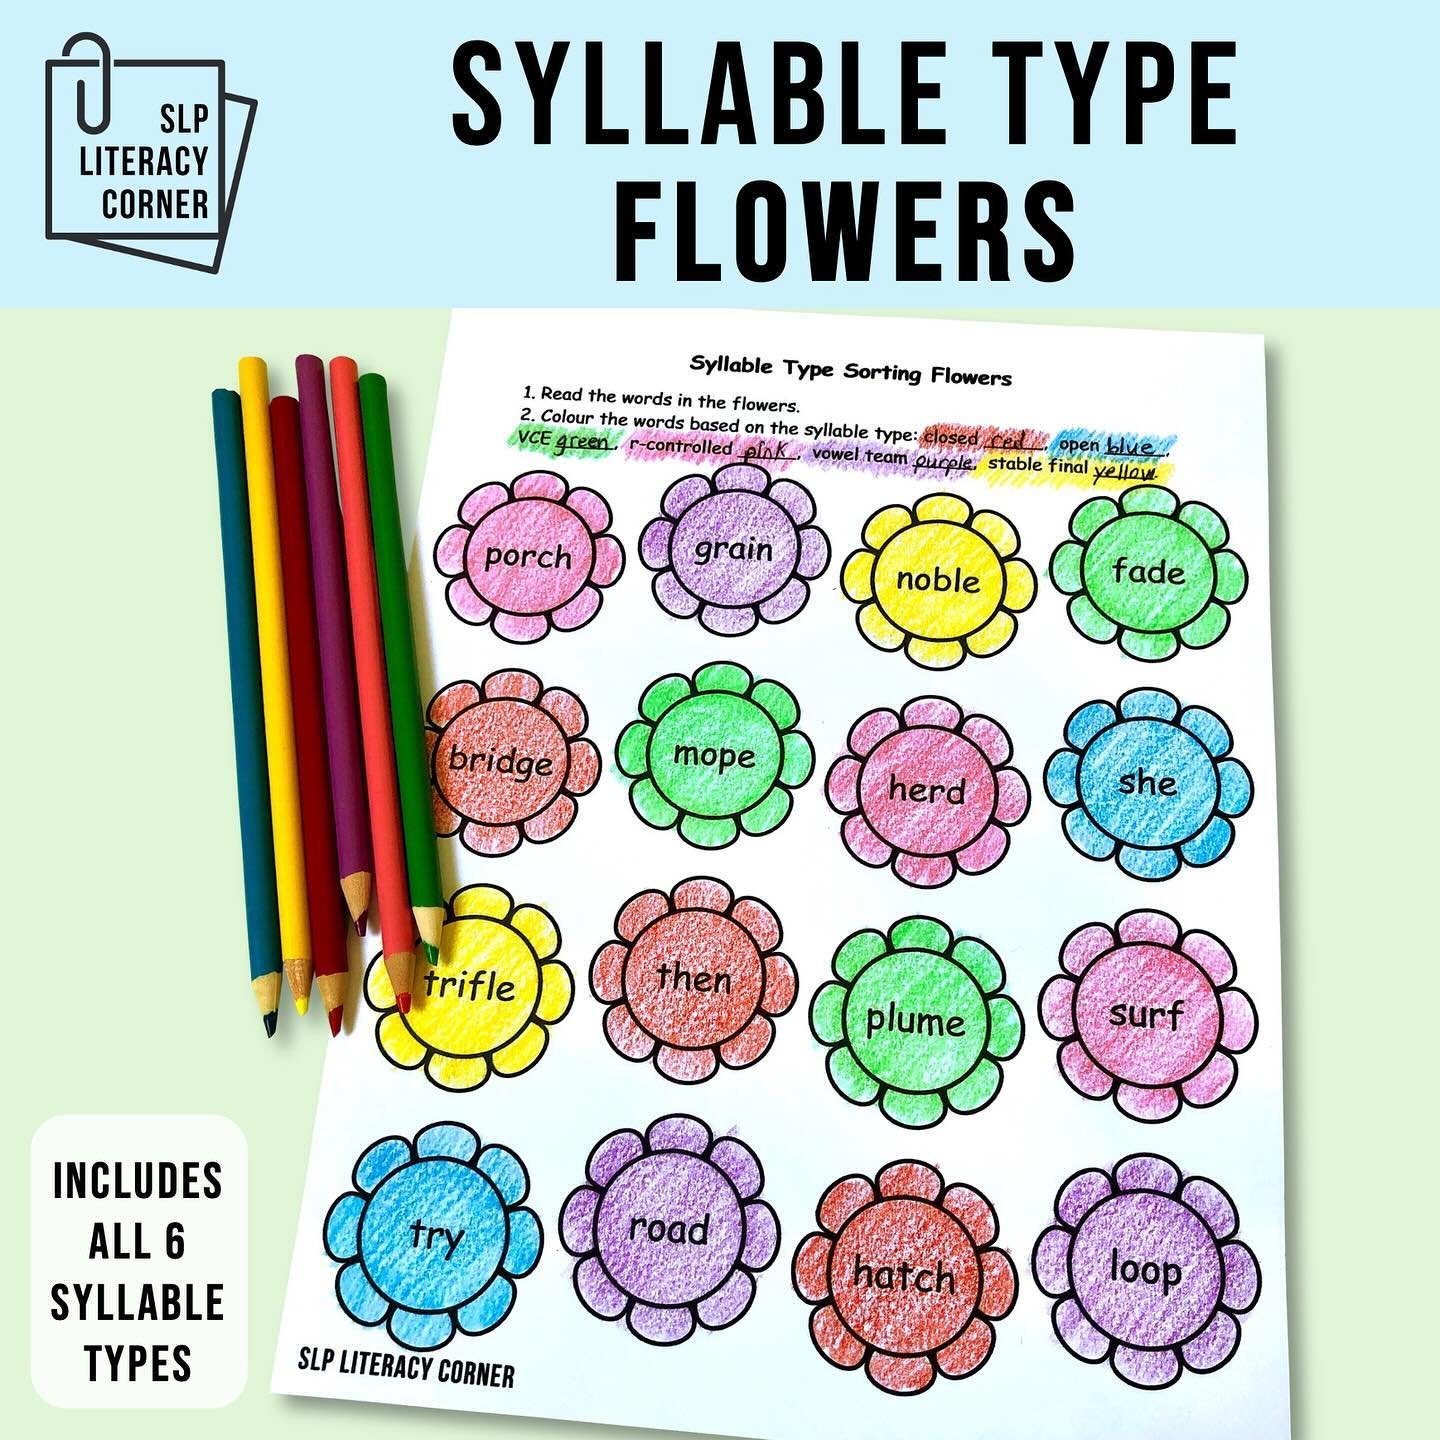 April showers bring May syllable type flowers! 🌸

📝 Perfect for spring, these worksheets are perfect for teaching and reviewing the 6 main written syllable types: closed, open, magic e (VCE), r-controlled, vowel team, stable final (CLE). 

📝 The f